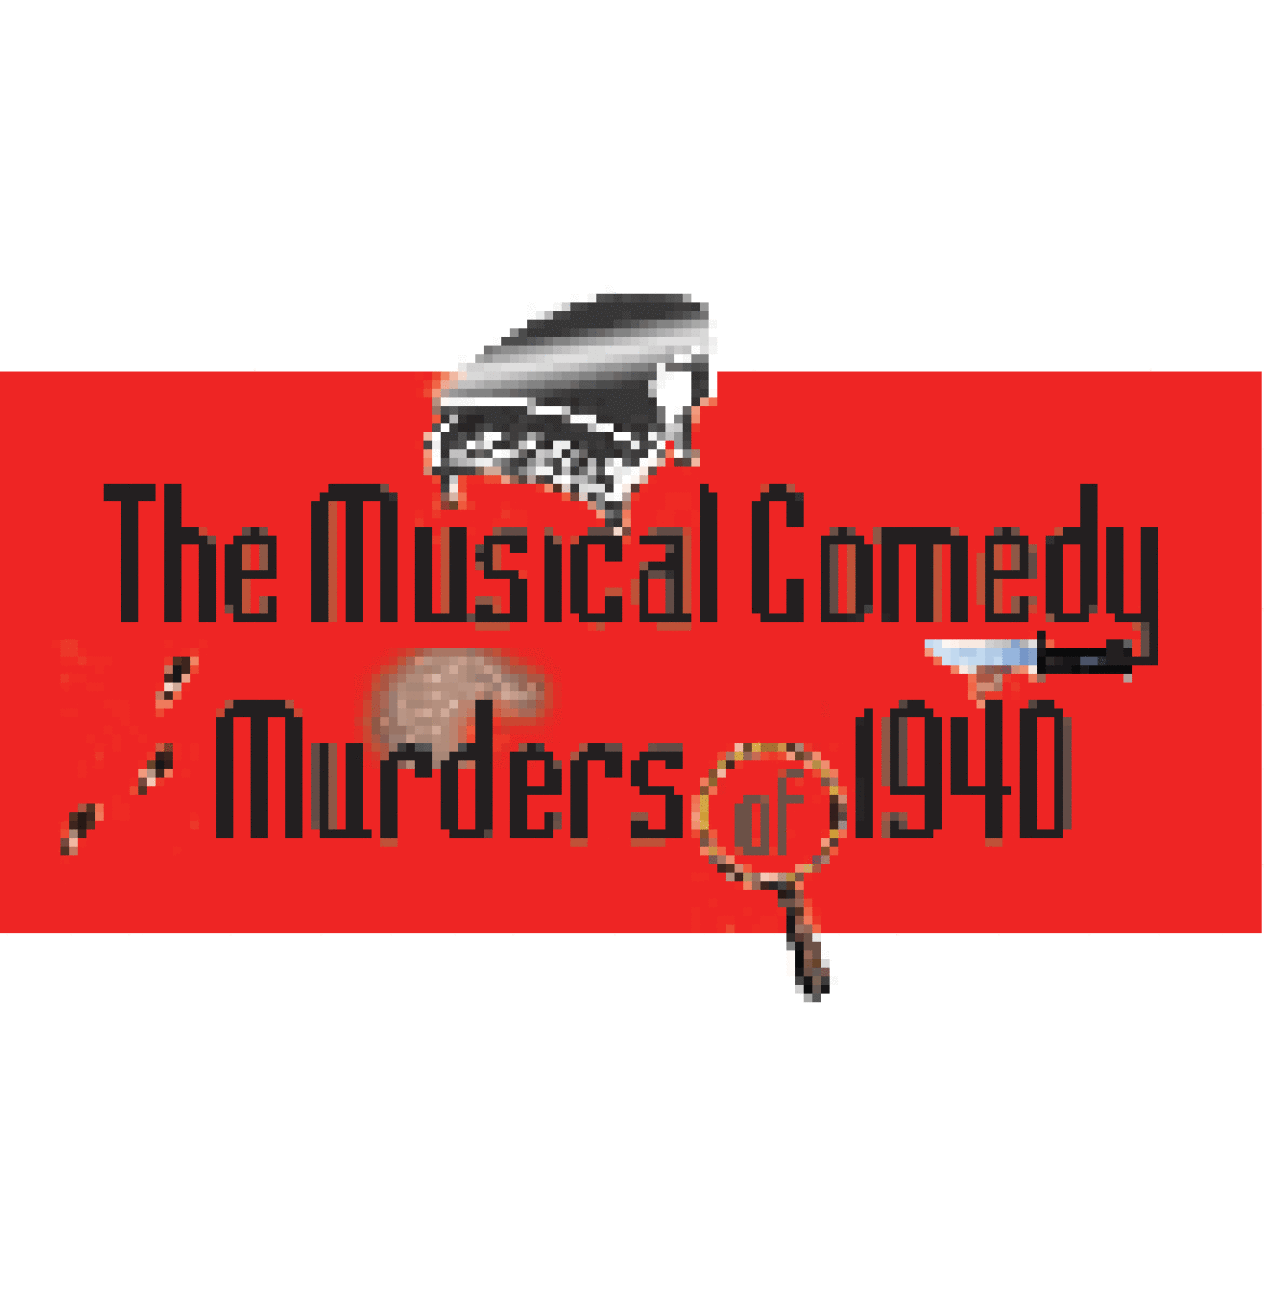 the musical comedy murders of 1940 logo 3130